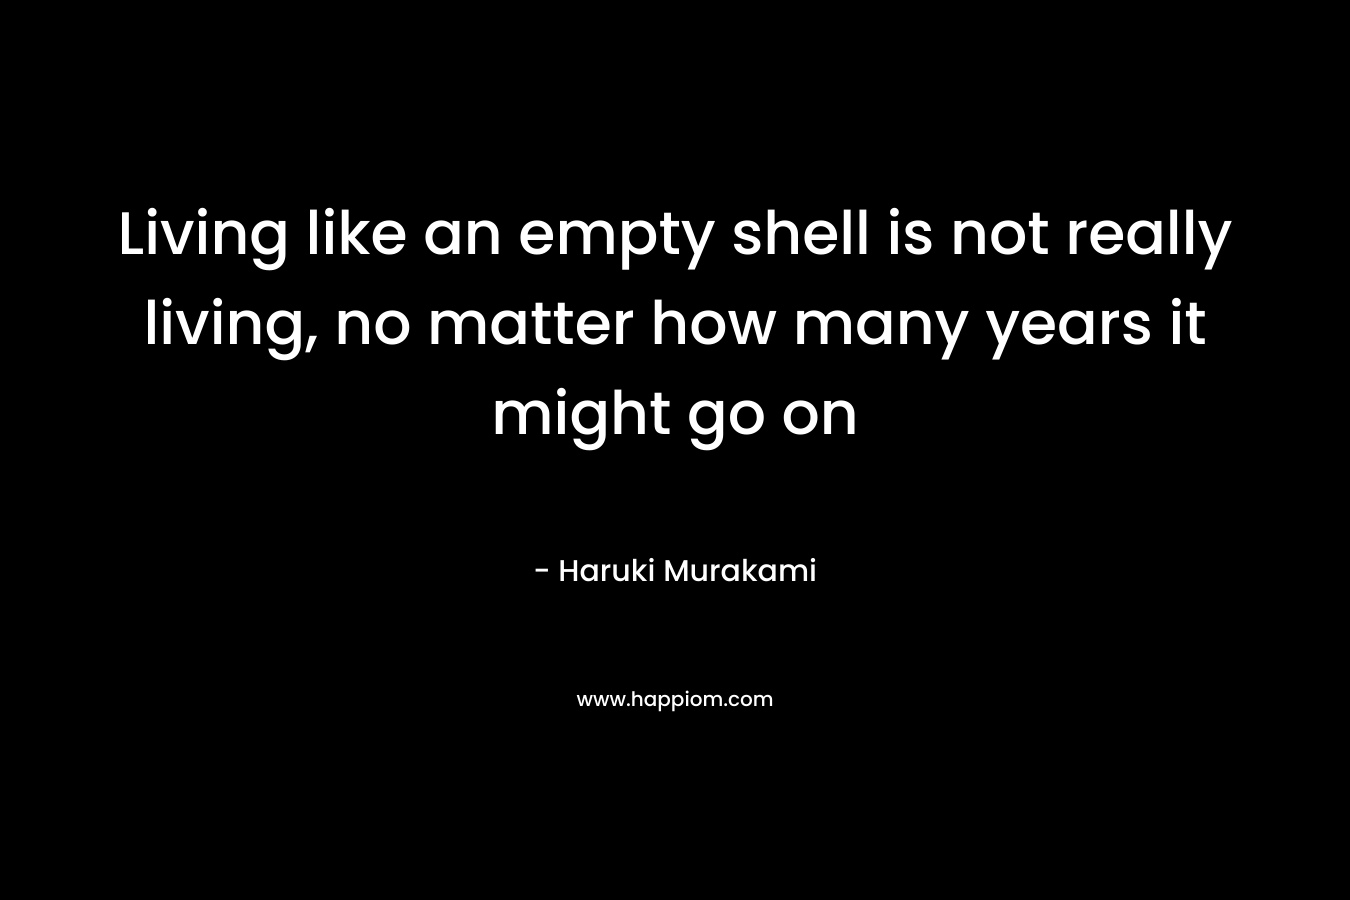 Living like an empty shell is not really living, no matter how many years it might go on